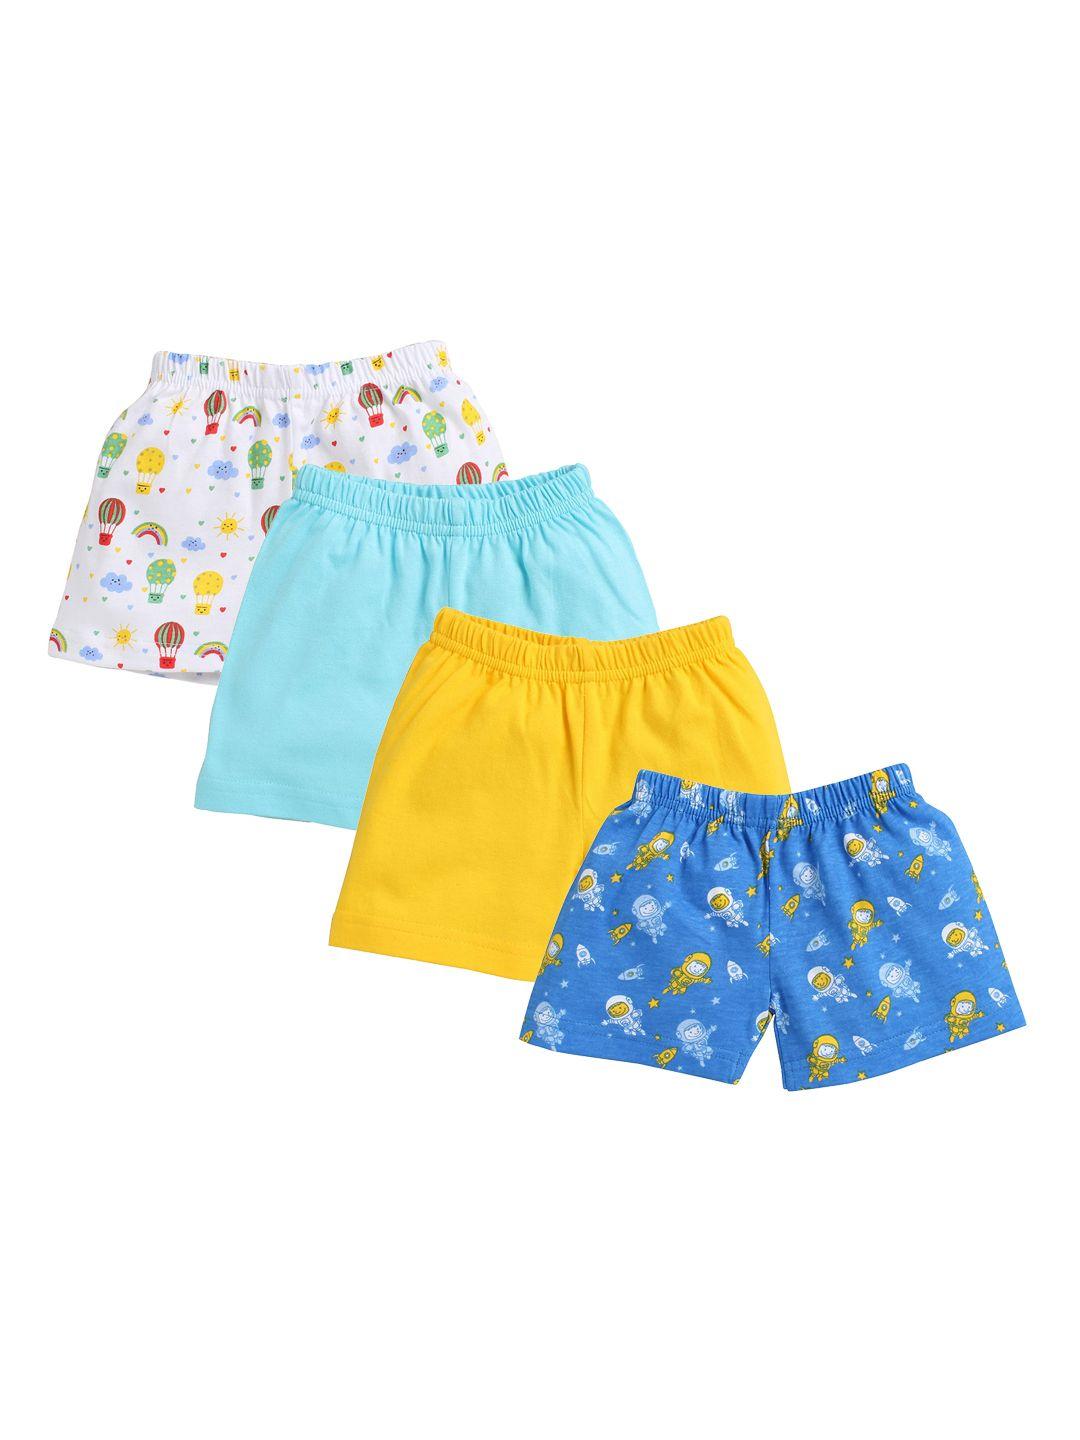 bumzee-boys-pack-of-4-printed-cotton-shorts